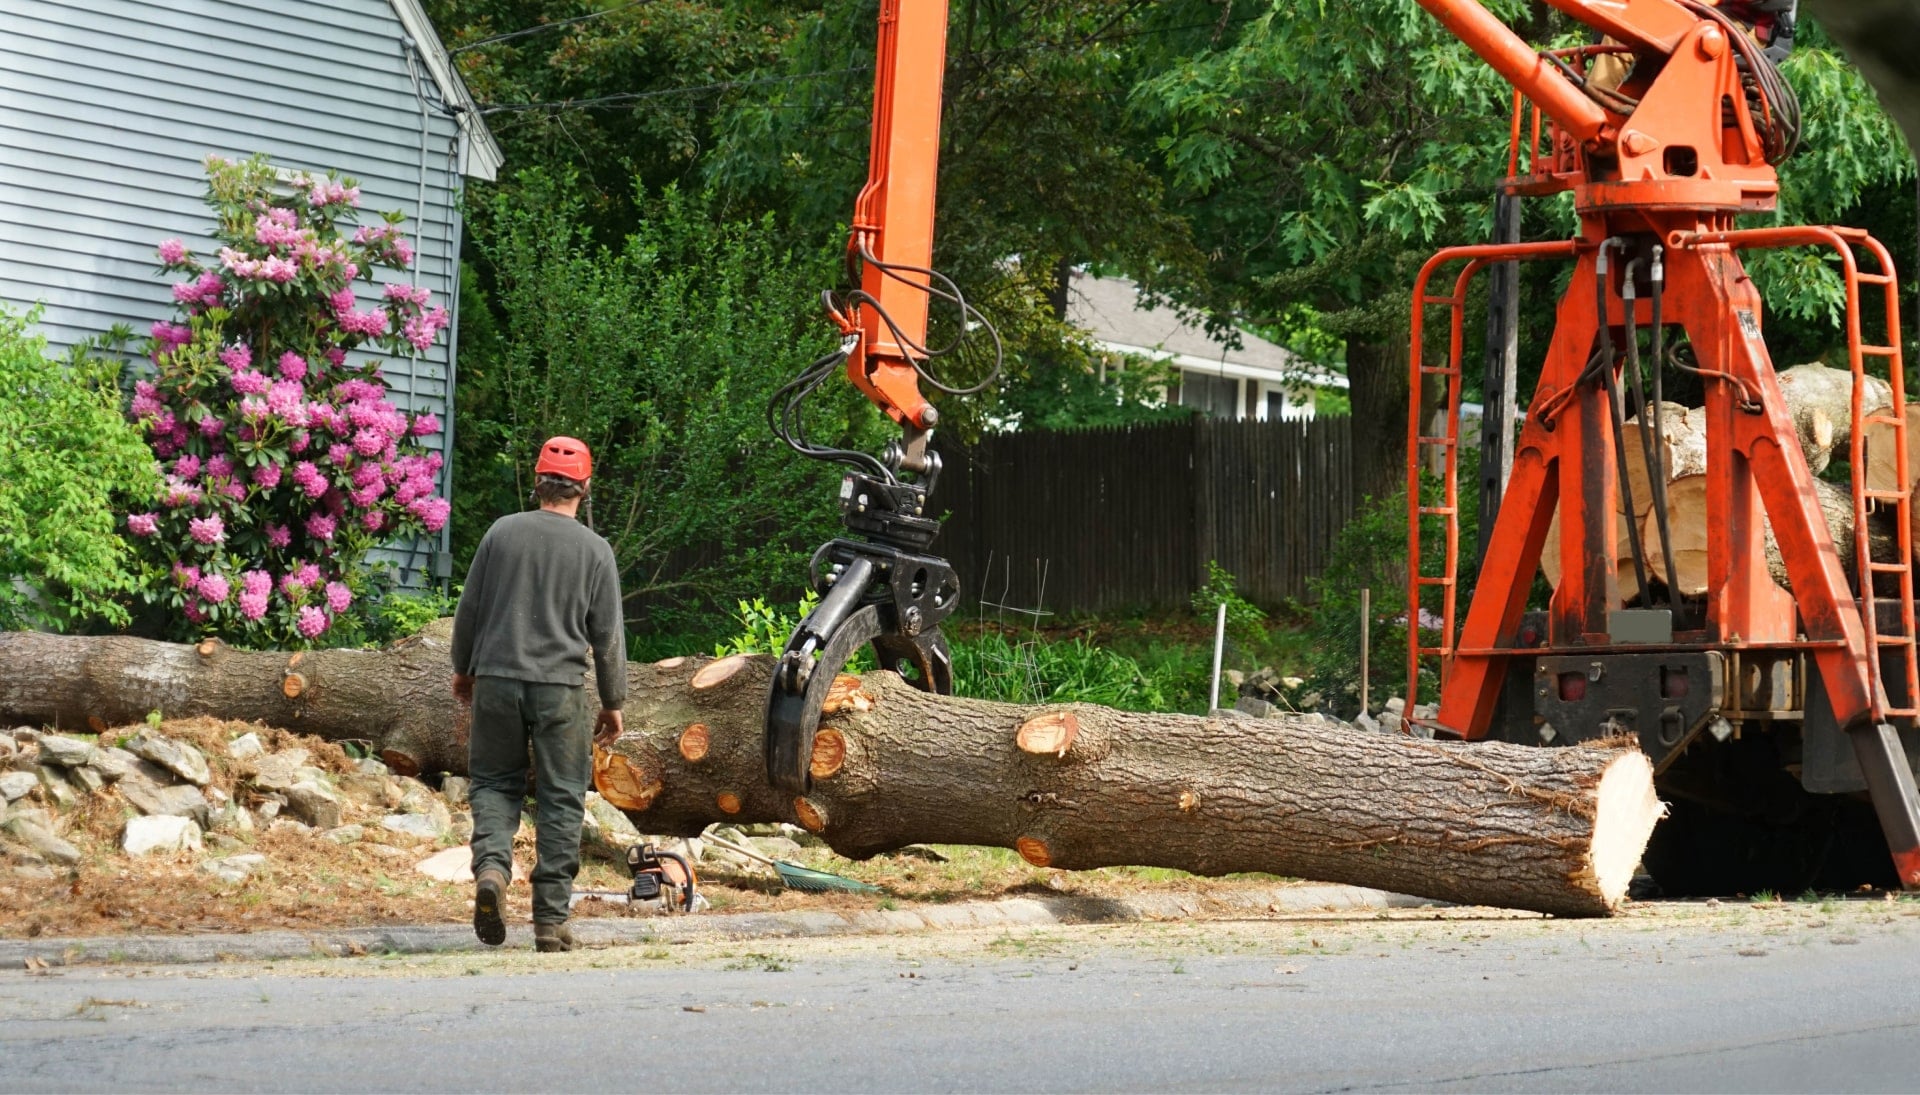 A tree stump has fallen and needs tree removal services in Fullerton, CA.